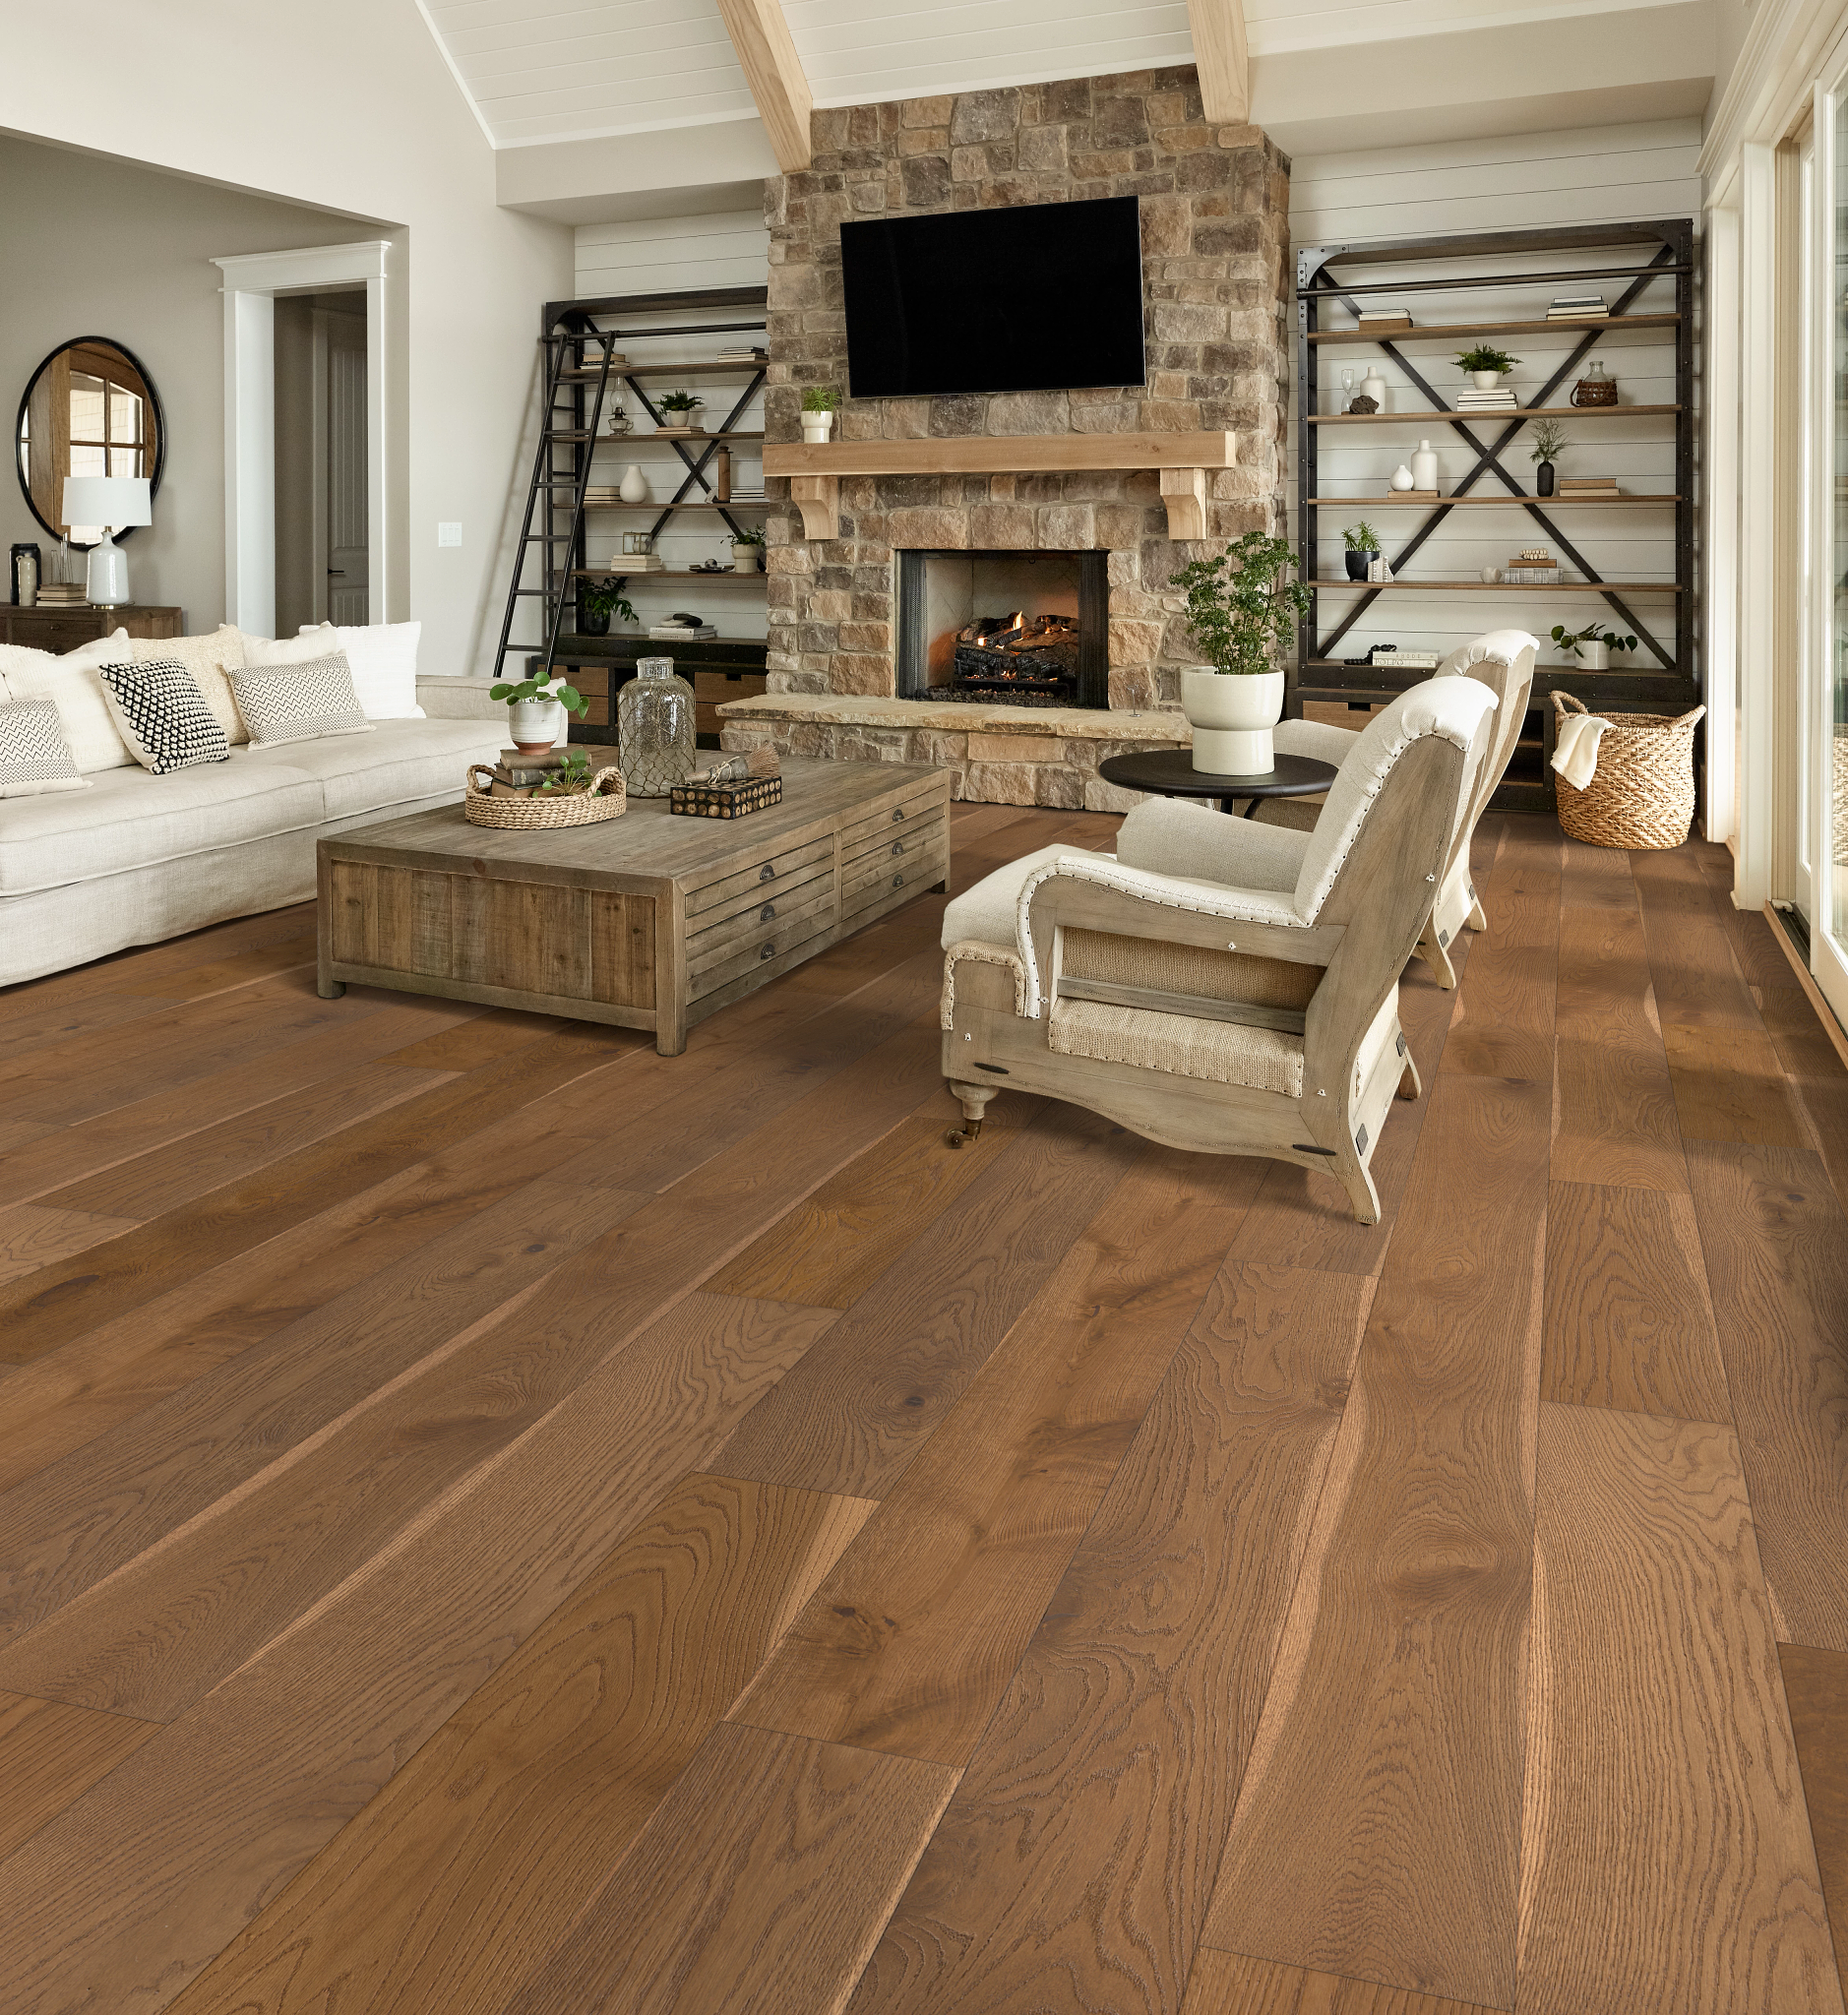 The Gallery Hardwood: inspiration to artistry